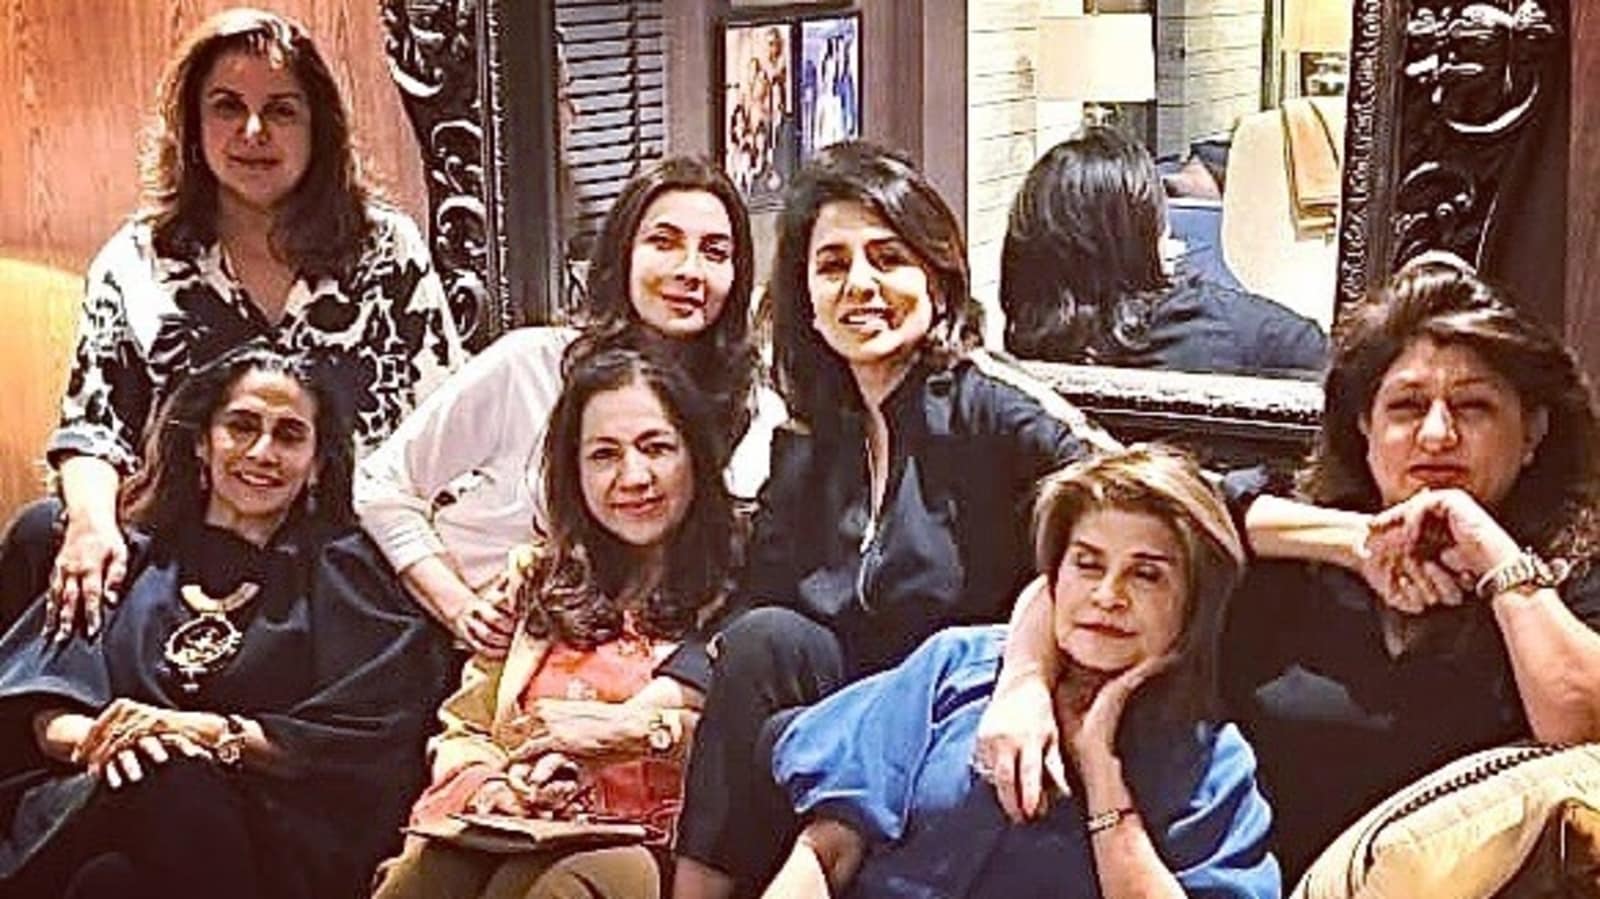 Fan says Farah Khan is like coriander in every dish she hangs out with Neetu Kapoor, Sunita Kapoor. See pic